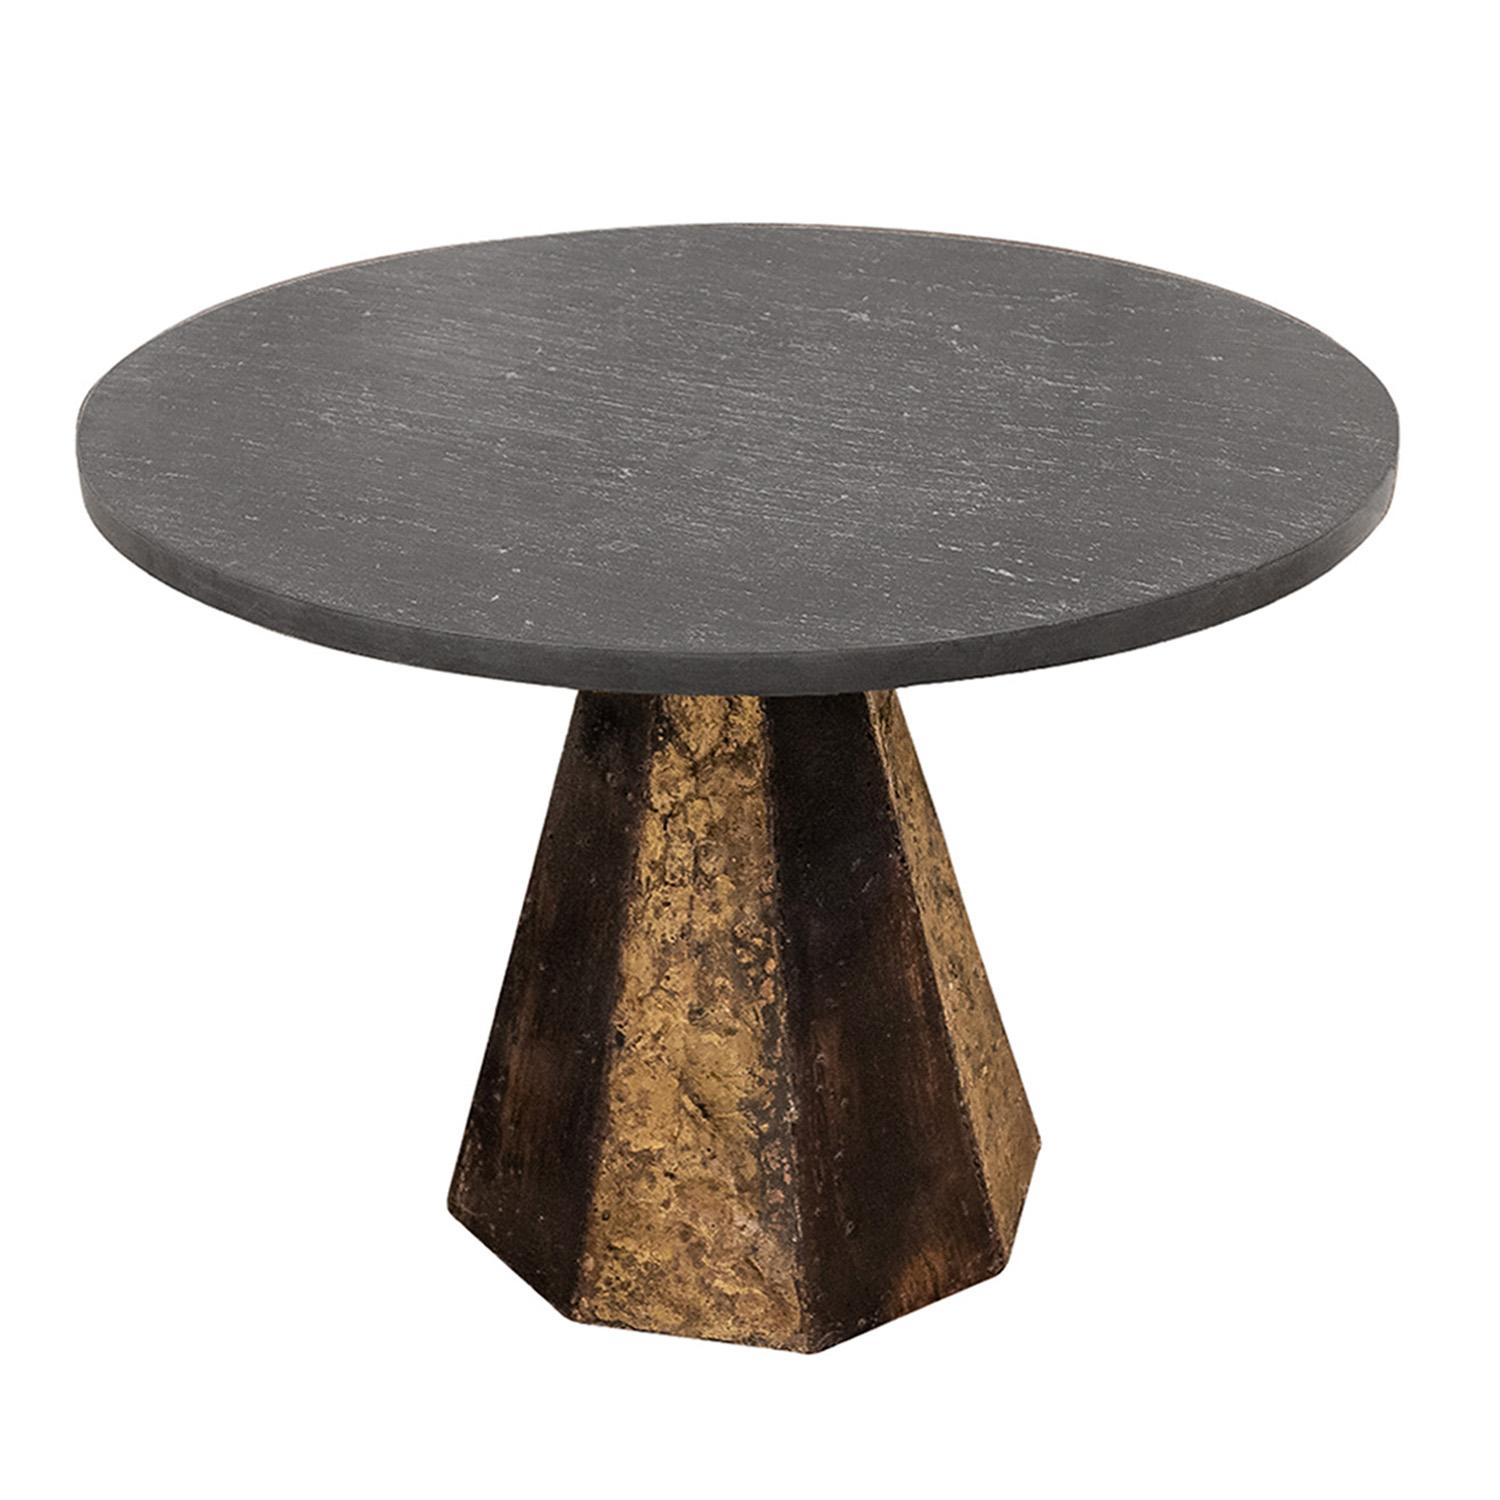 Stunning side table with 6 sided welded steel base with sections which are textured and gilded along with a thick cleft slate top by Paul Evans, American 1968. This table is extremely rare and the artisanship is superb.

Provenance:
Purchased by